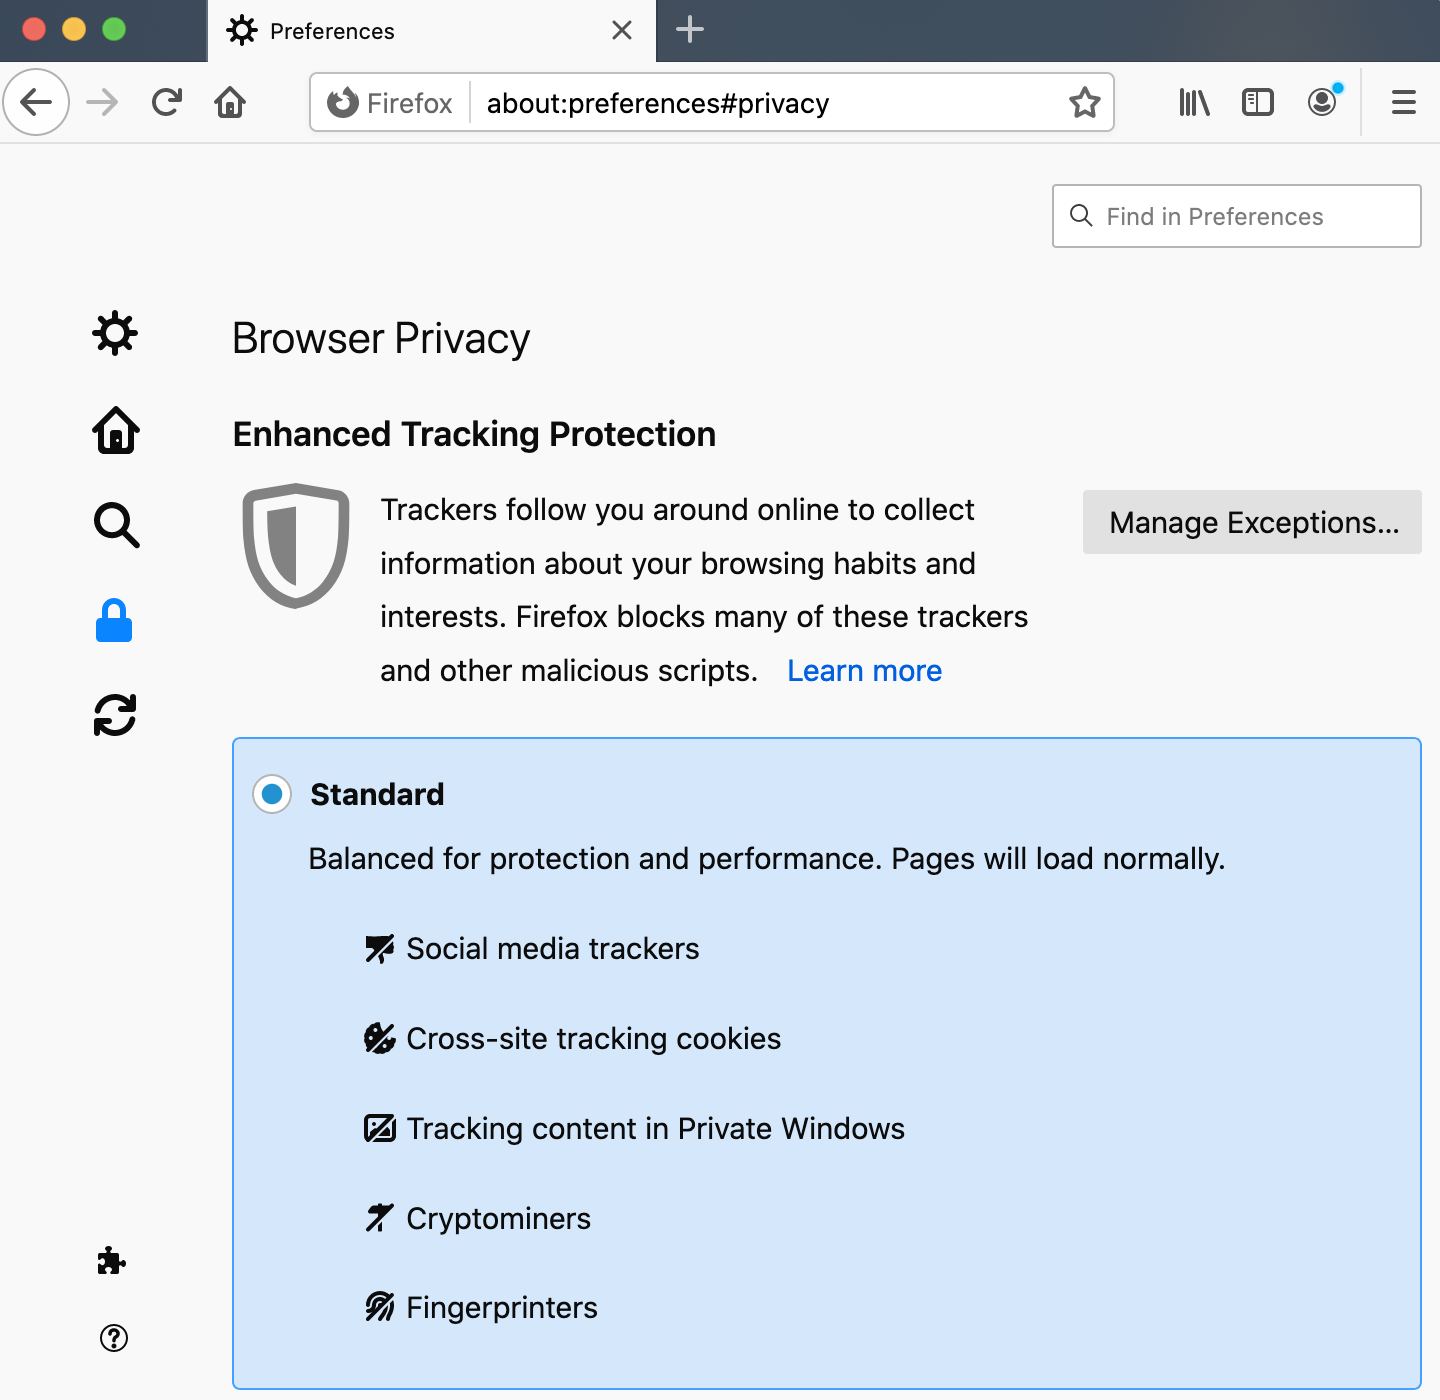 Navigate to Firefox Browser Privacy with the blue lock icon.